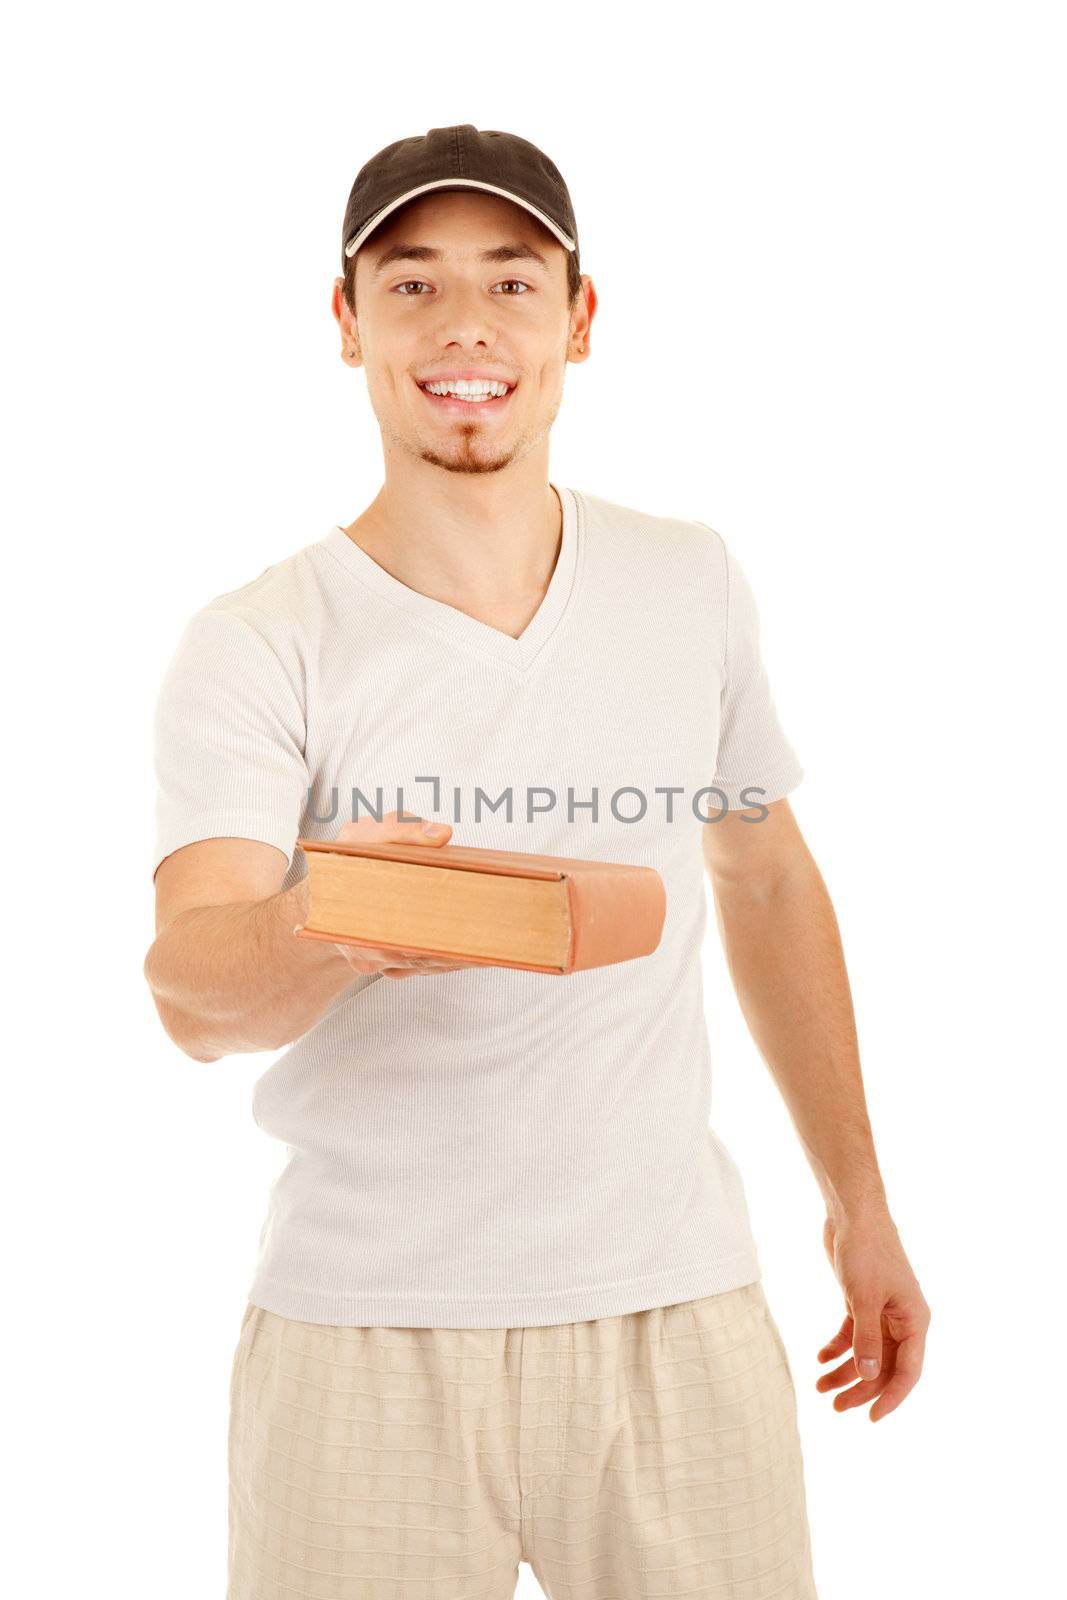 Smiling young casual men advices a book. On white background. Focus on man's eyes.